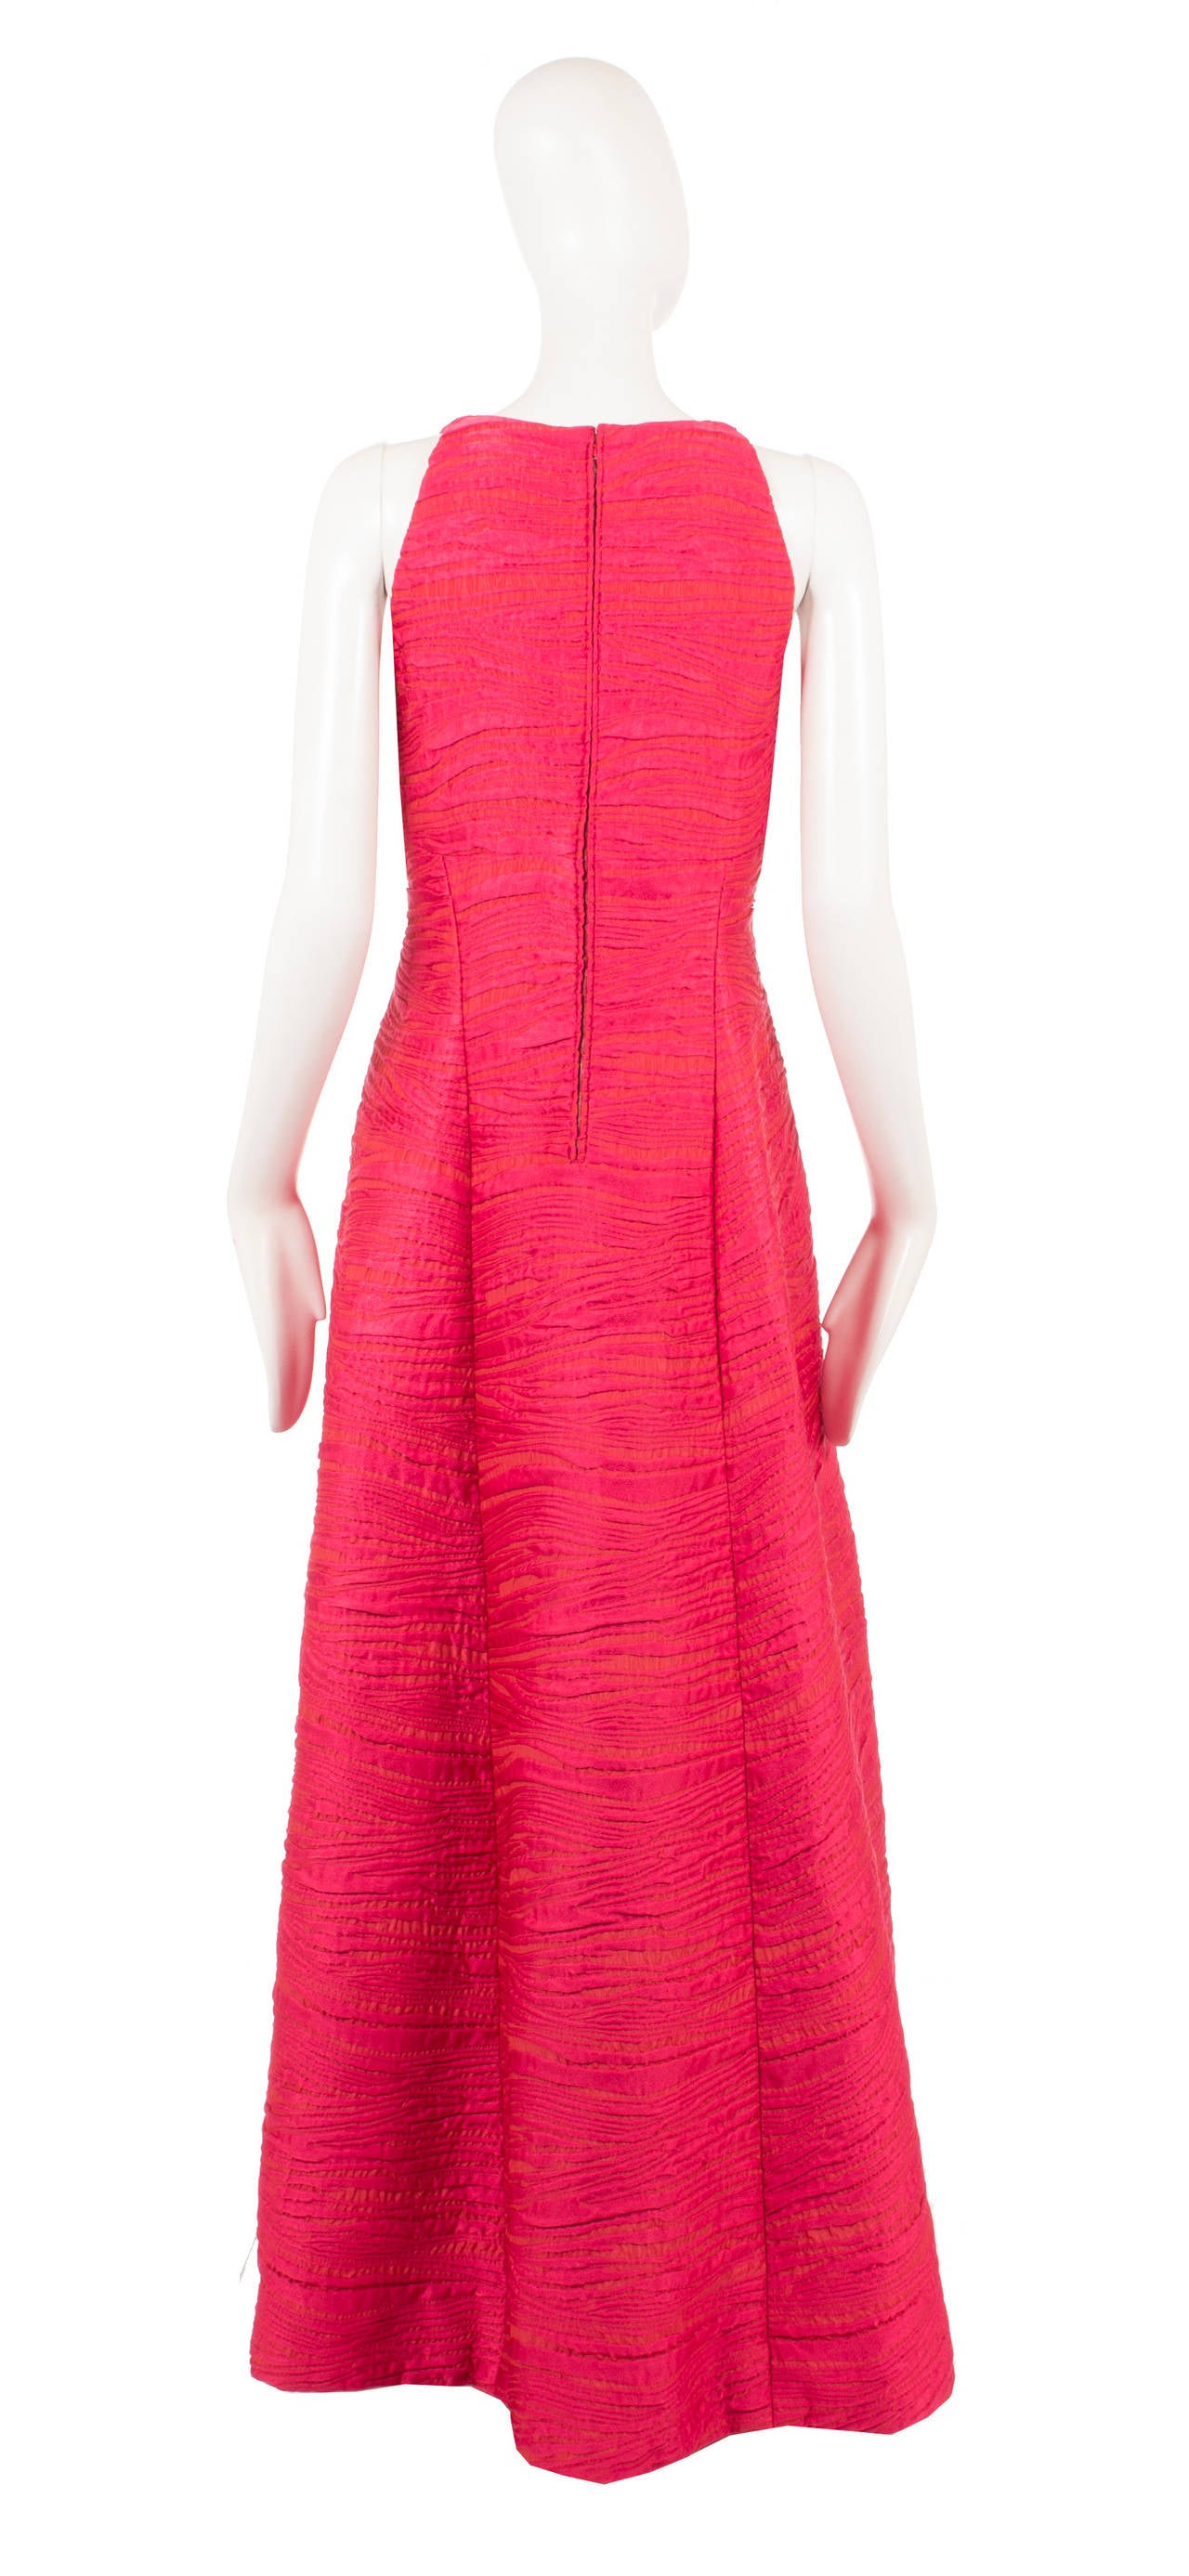 Pierre Balmain haute couture pink silk dress, circa 1960 In Excellent Condition For Sale In London, GB